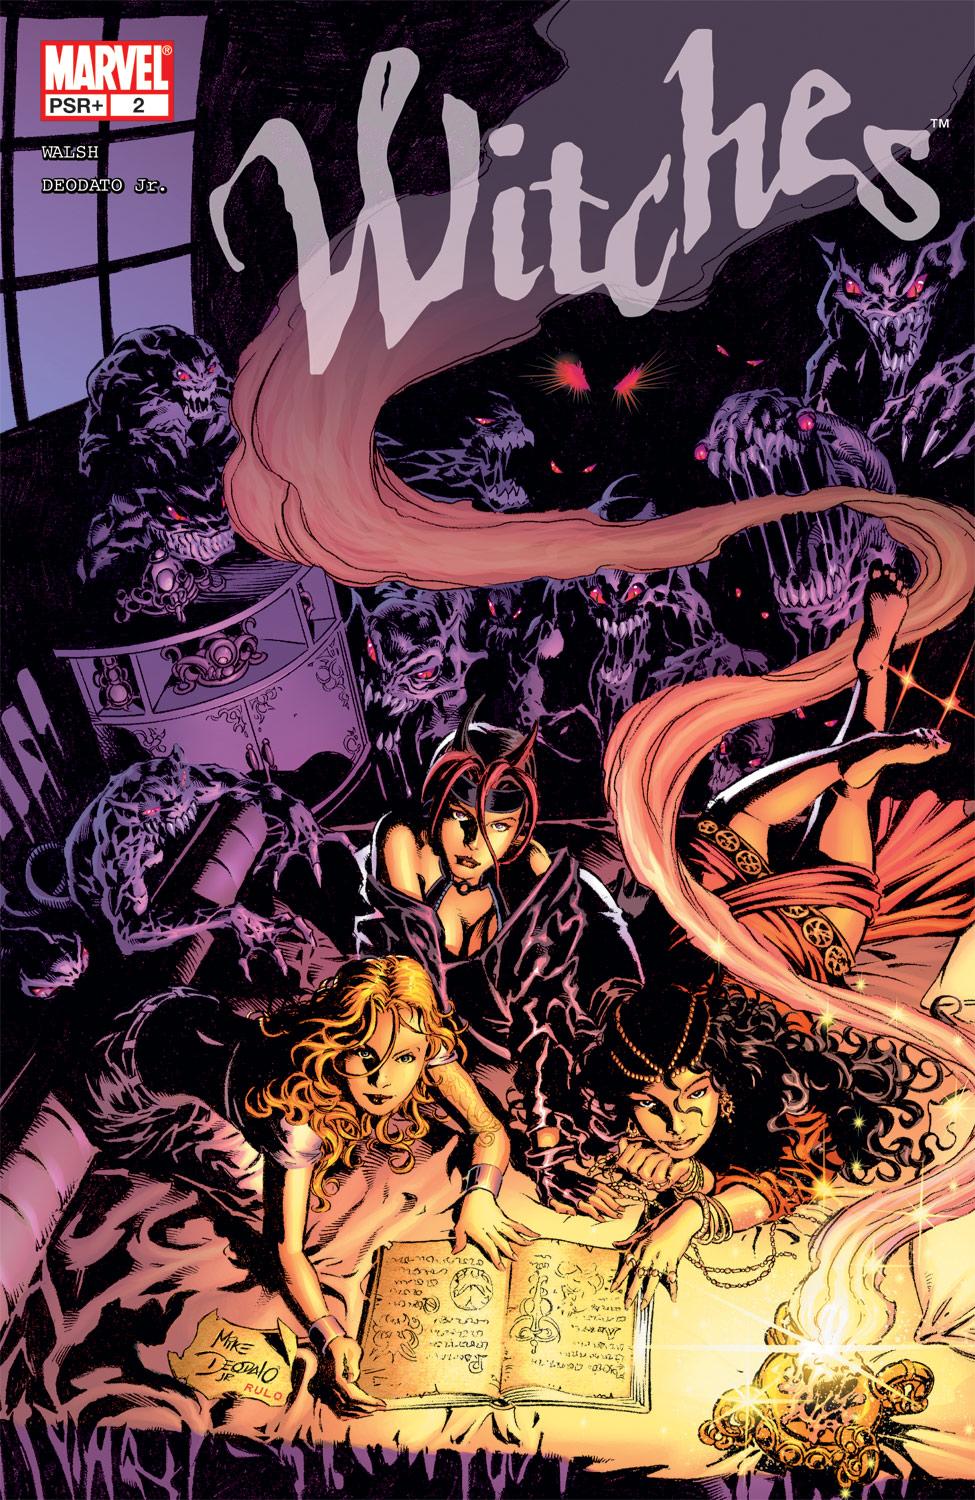 Witches (2004) #2